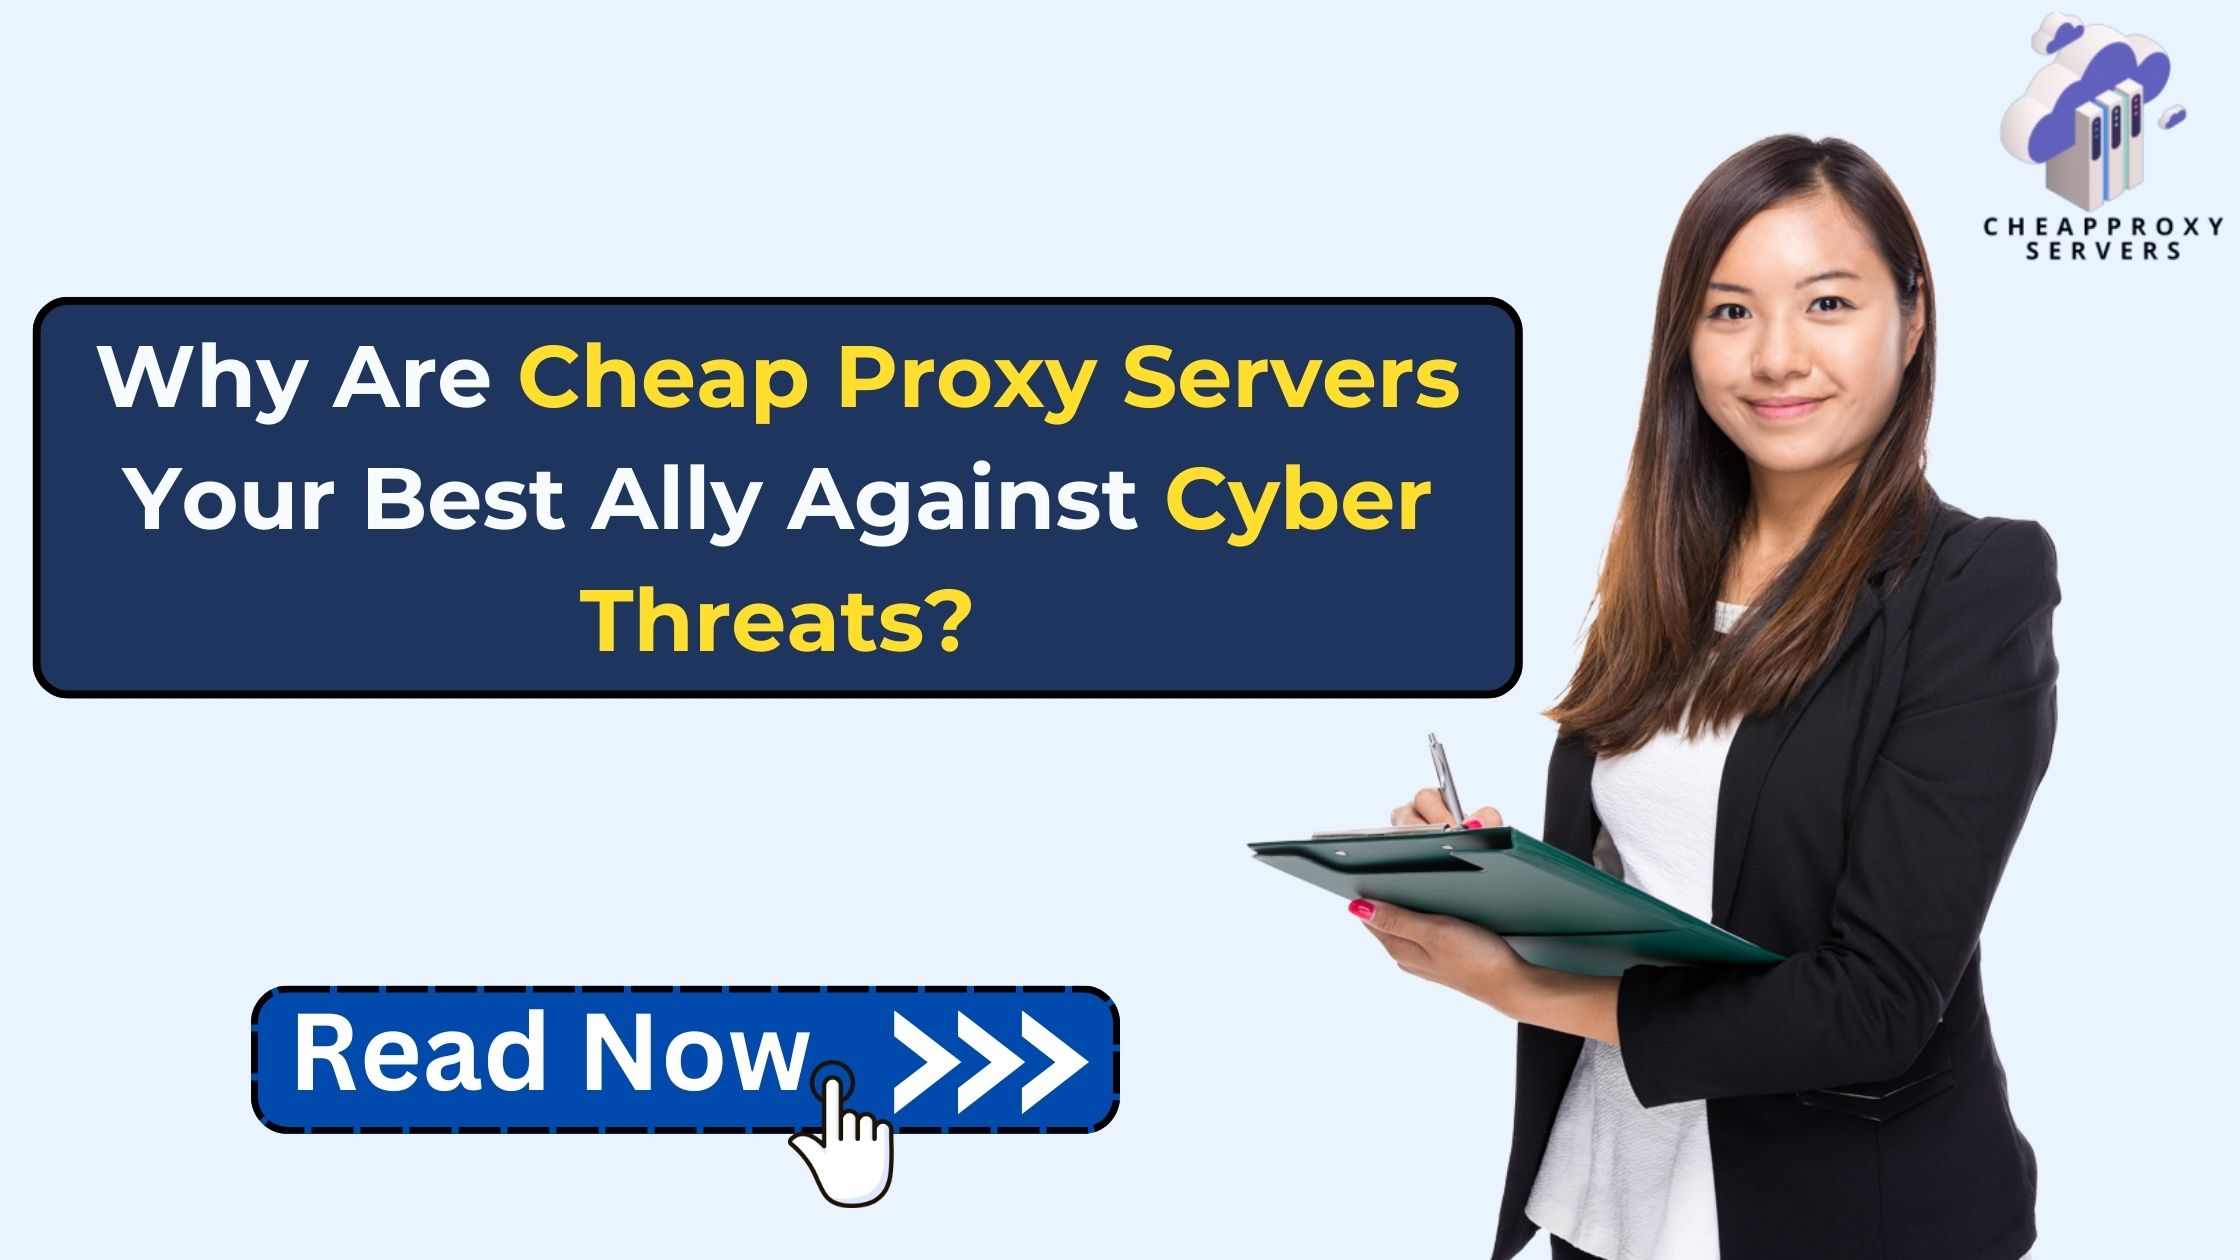 Why Are Cheap Proxy Servers Your Best Ally Against Cyber Threats?